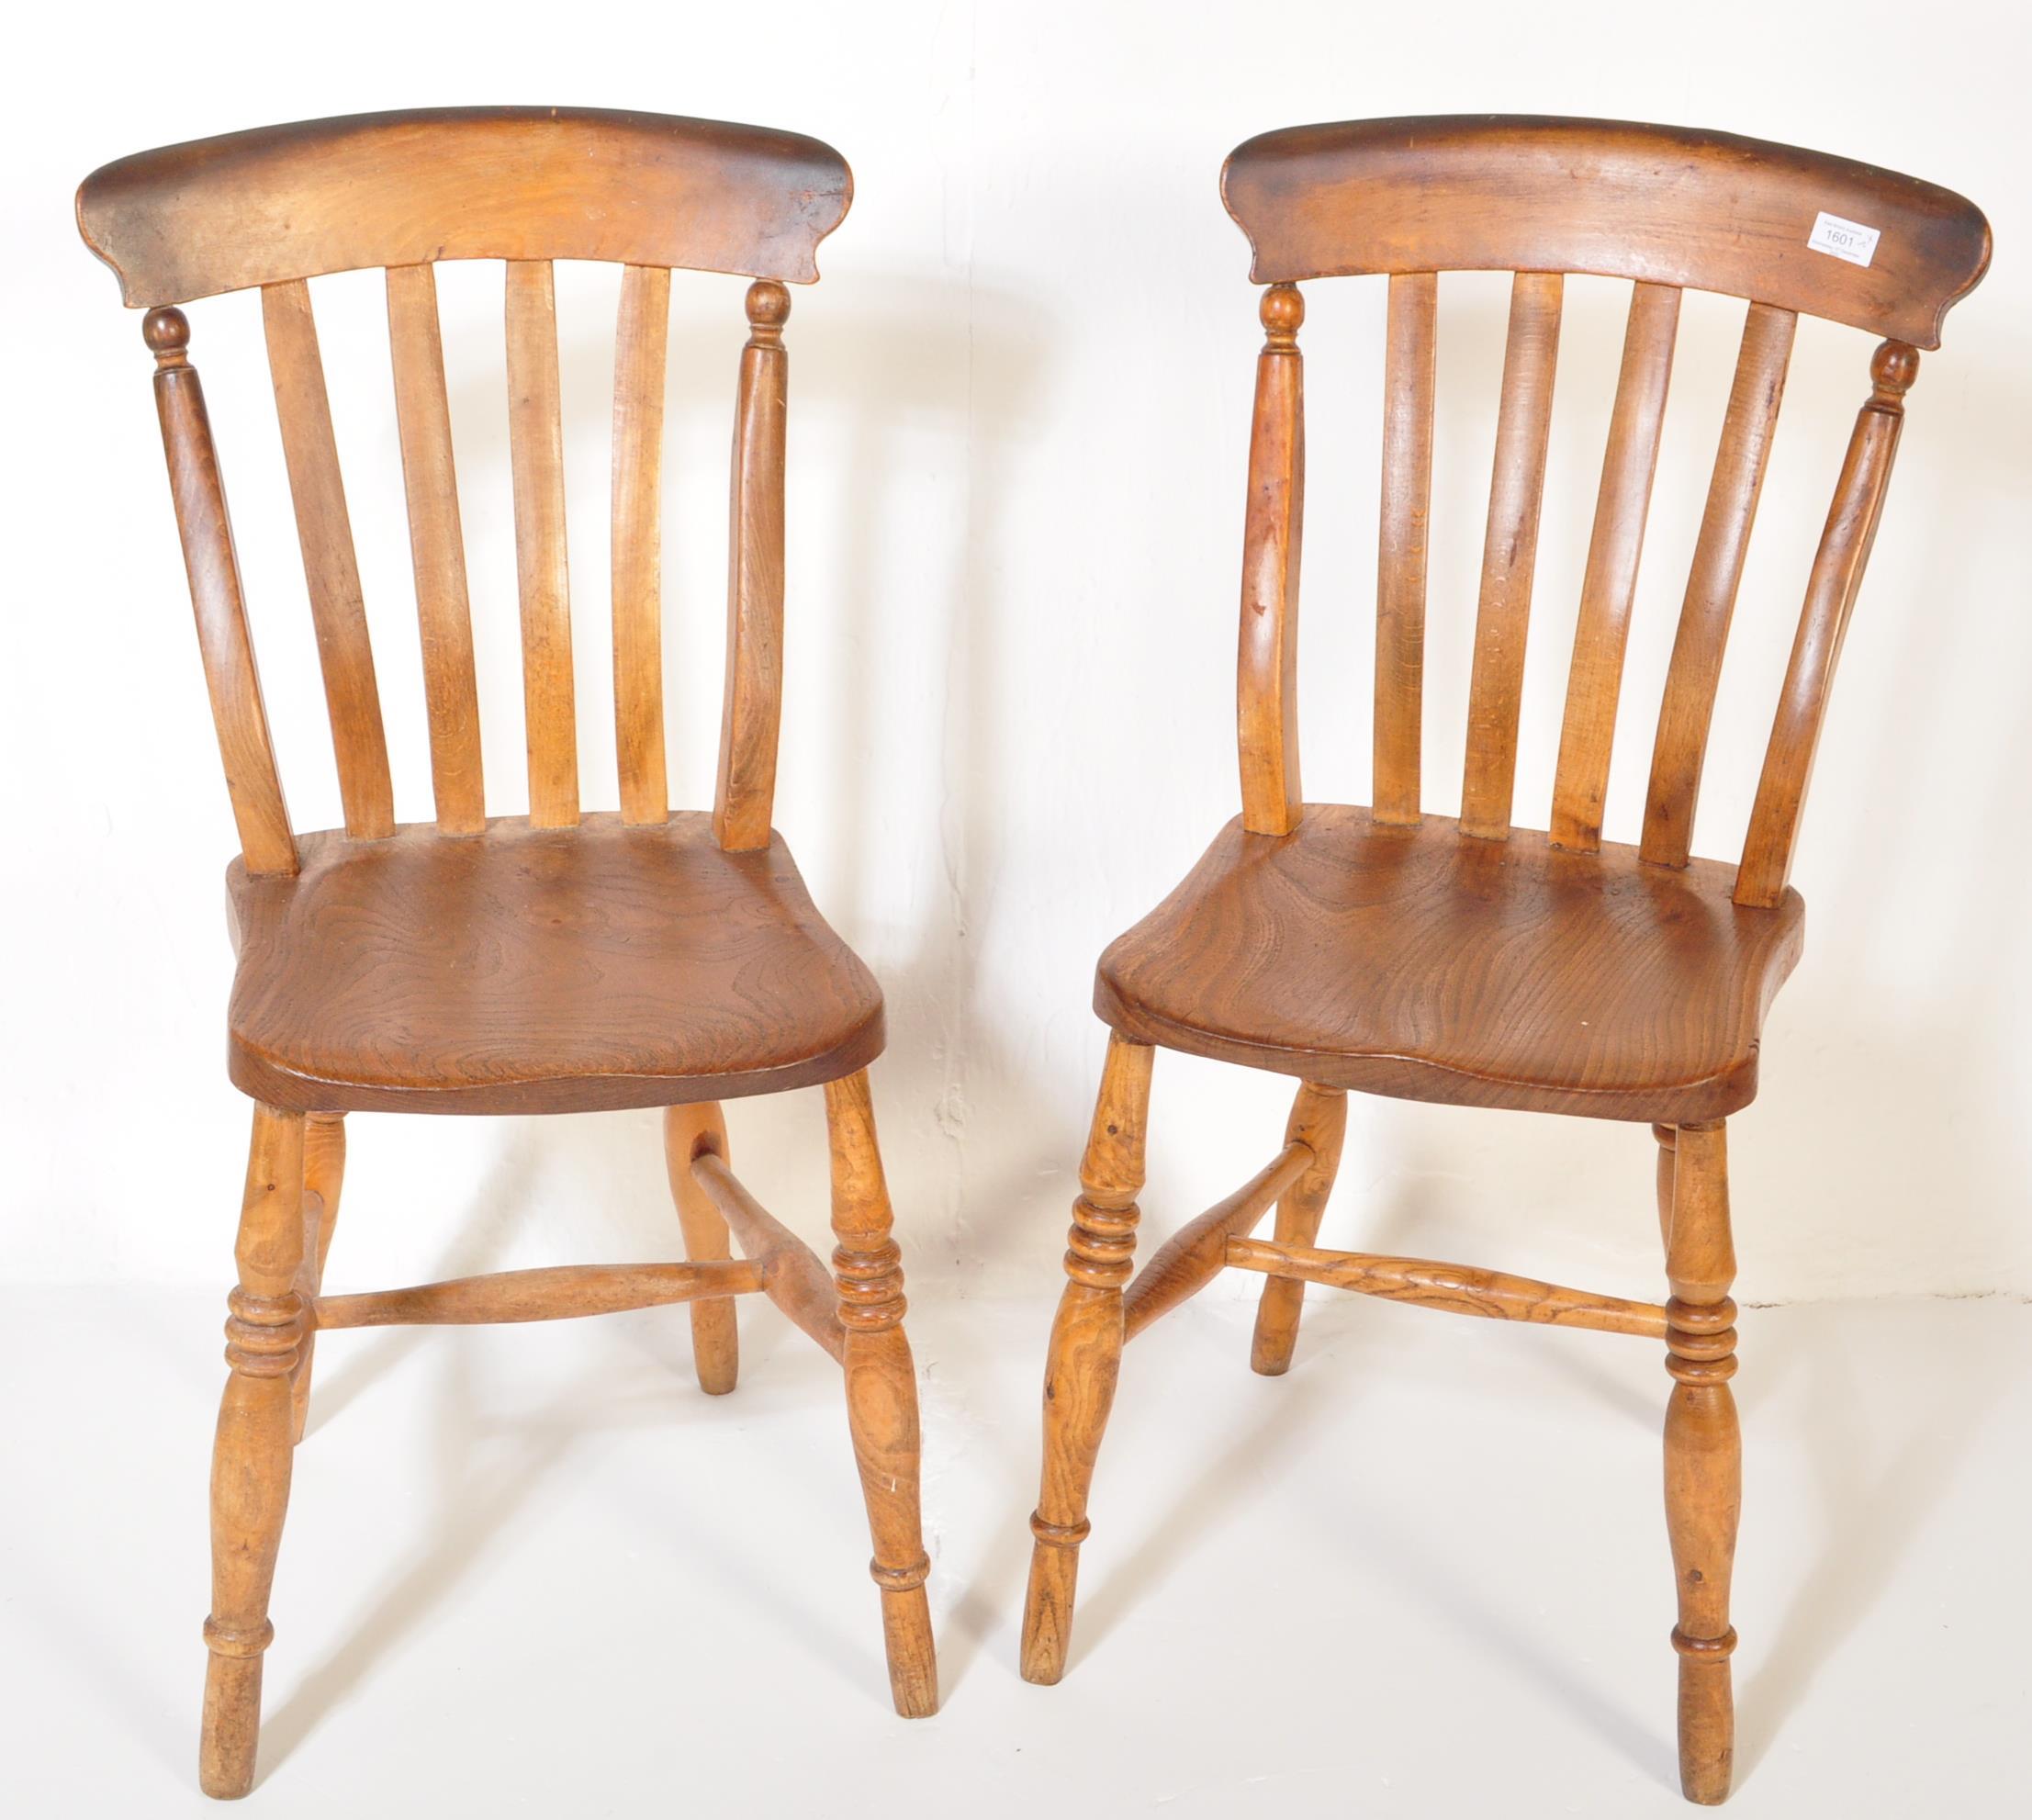 PAIR OF VICTORIAN BEECH & ELM FARMHOUSE WINDSOR CHAIRS - Image 2 of 5